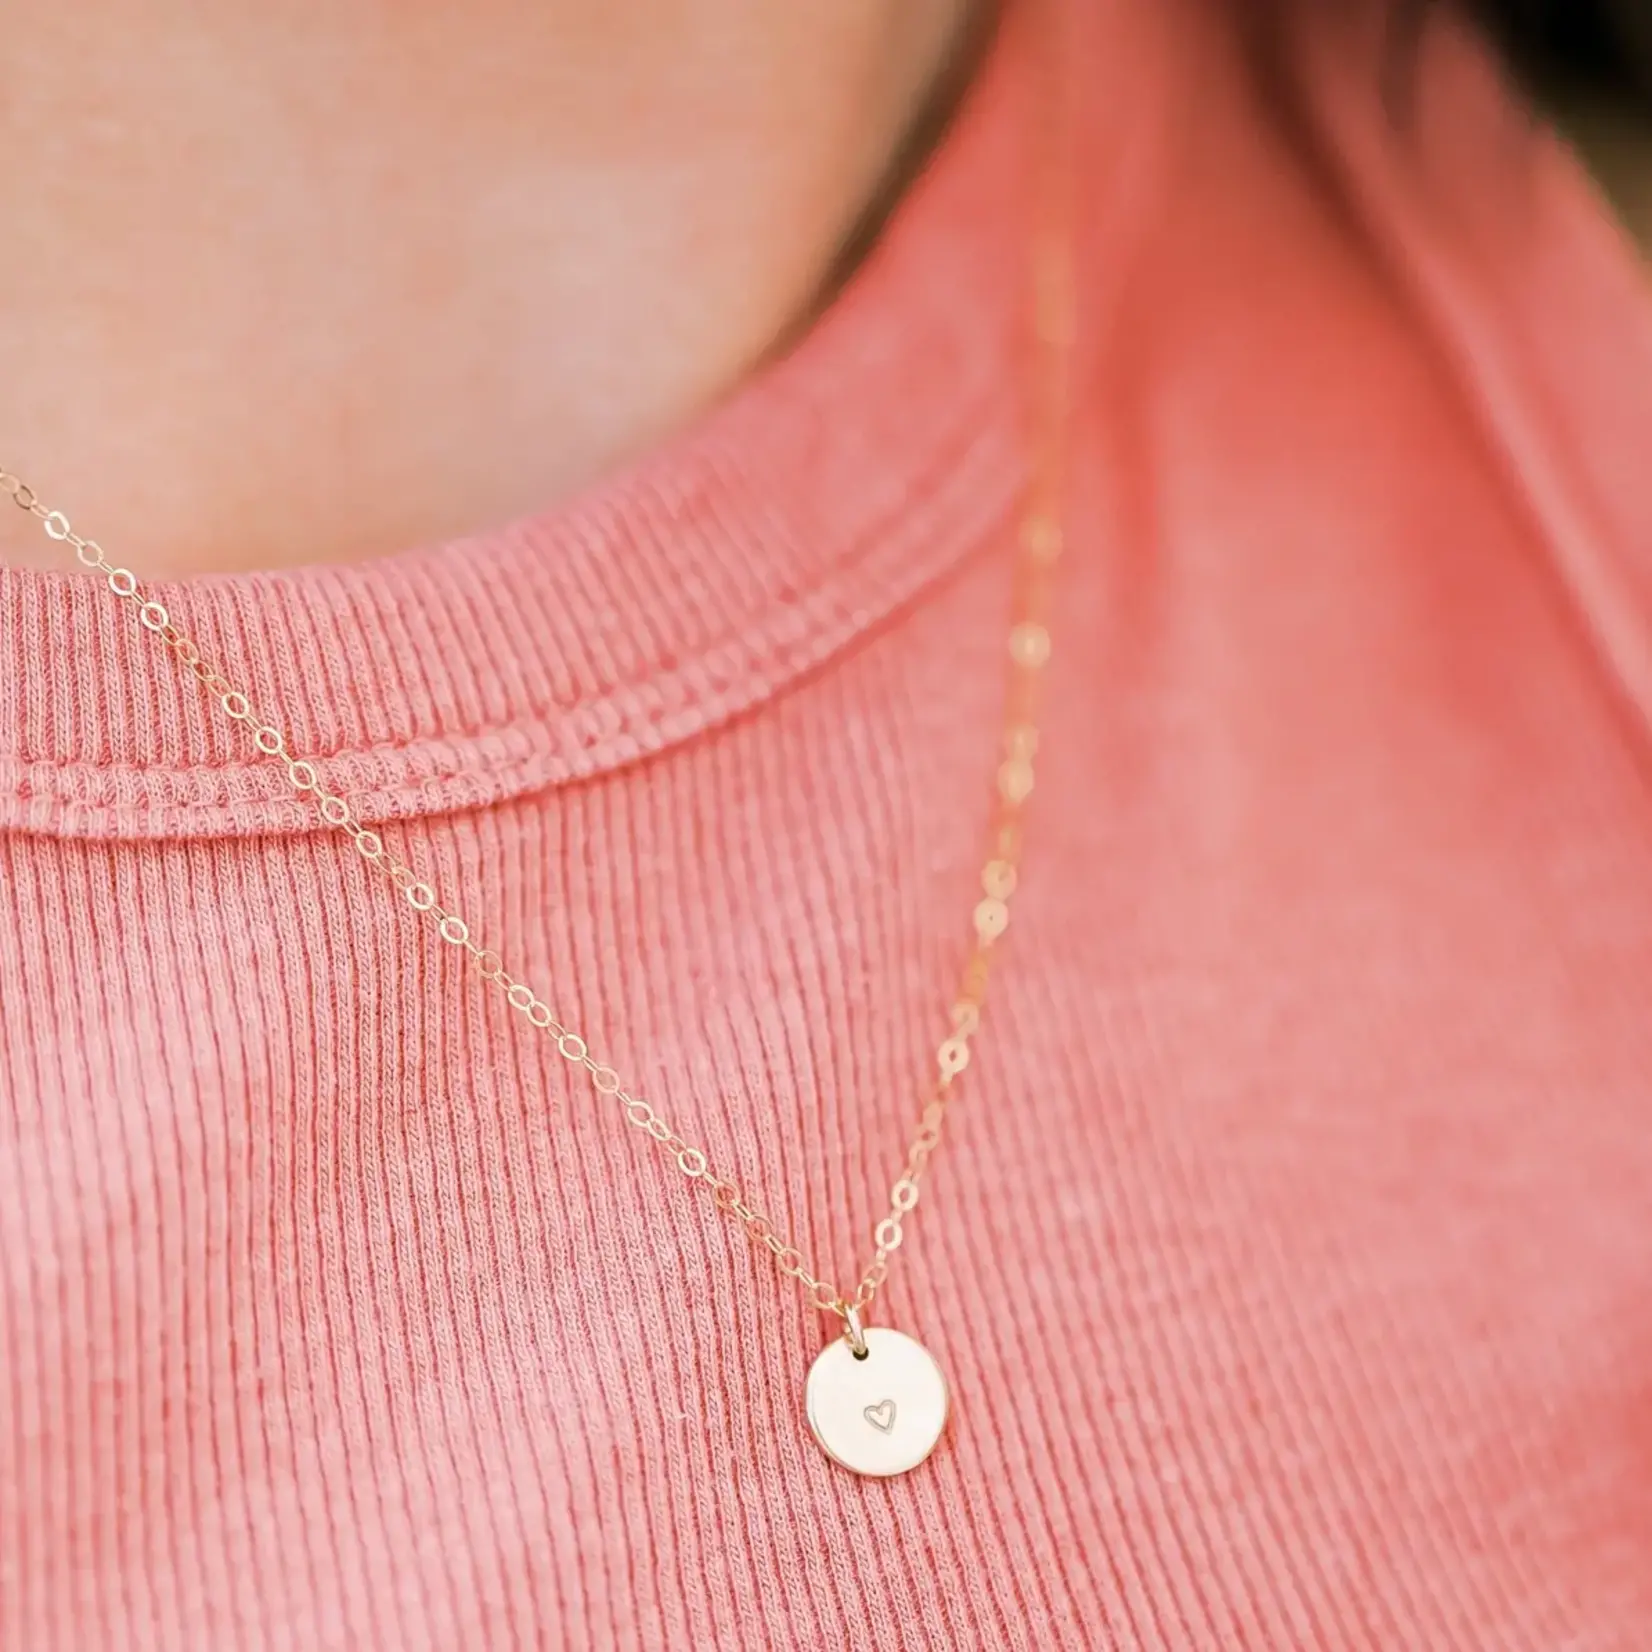 Barberry & Lace 14k Gold Filled Heart Disc Necklace